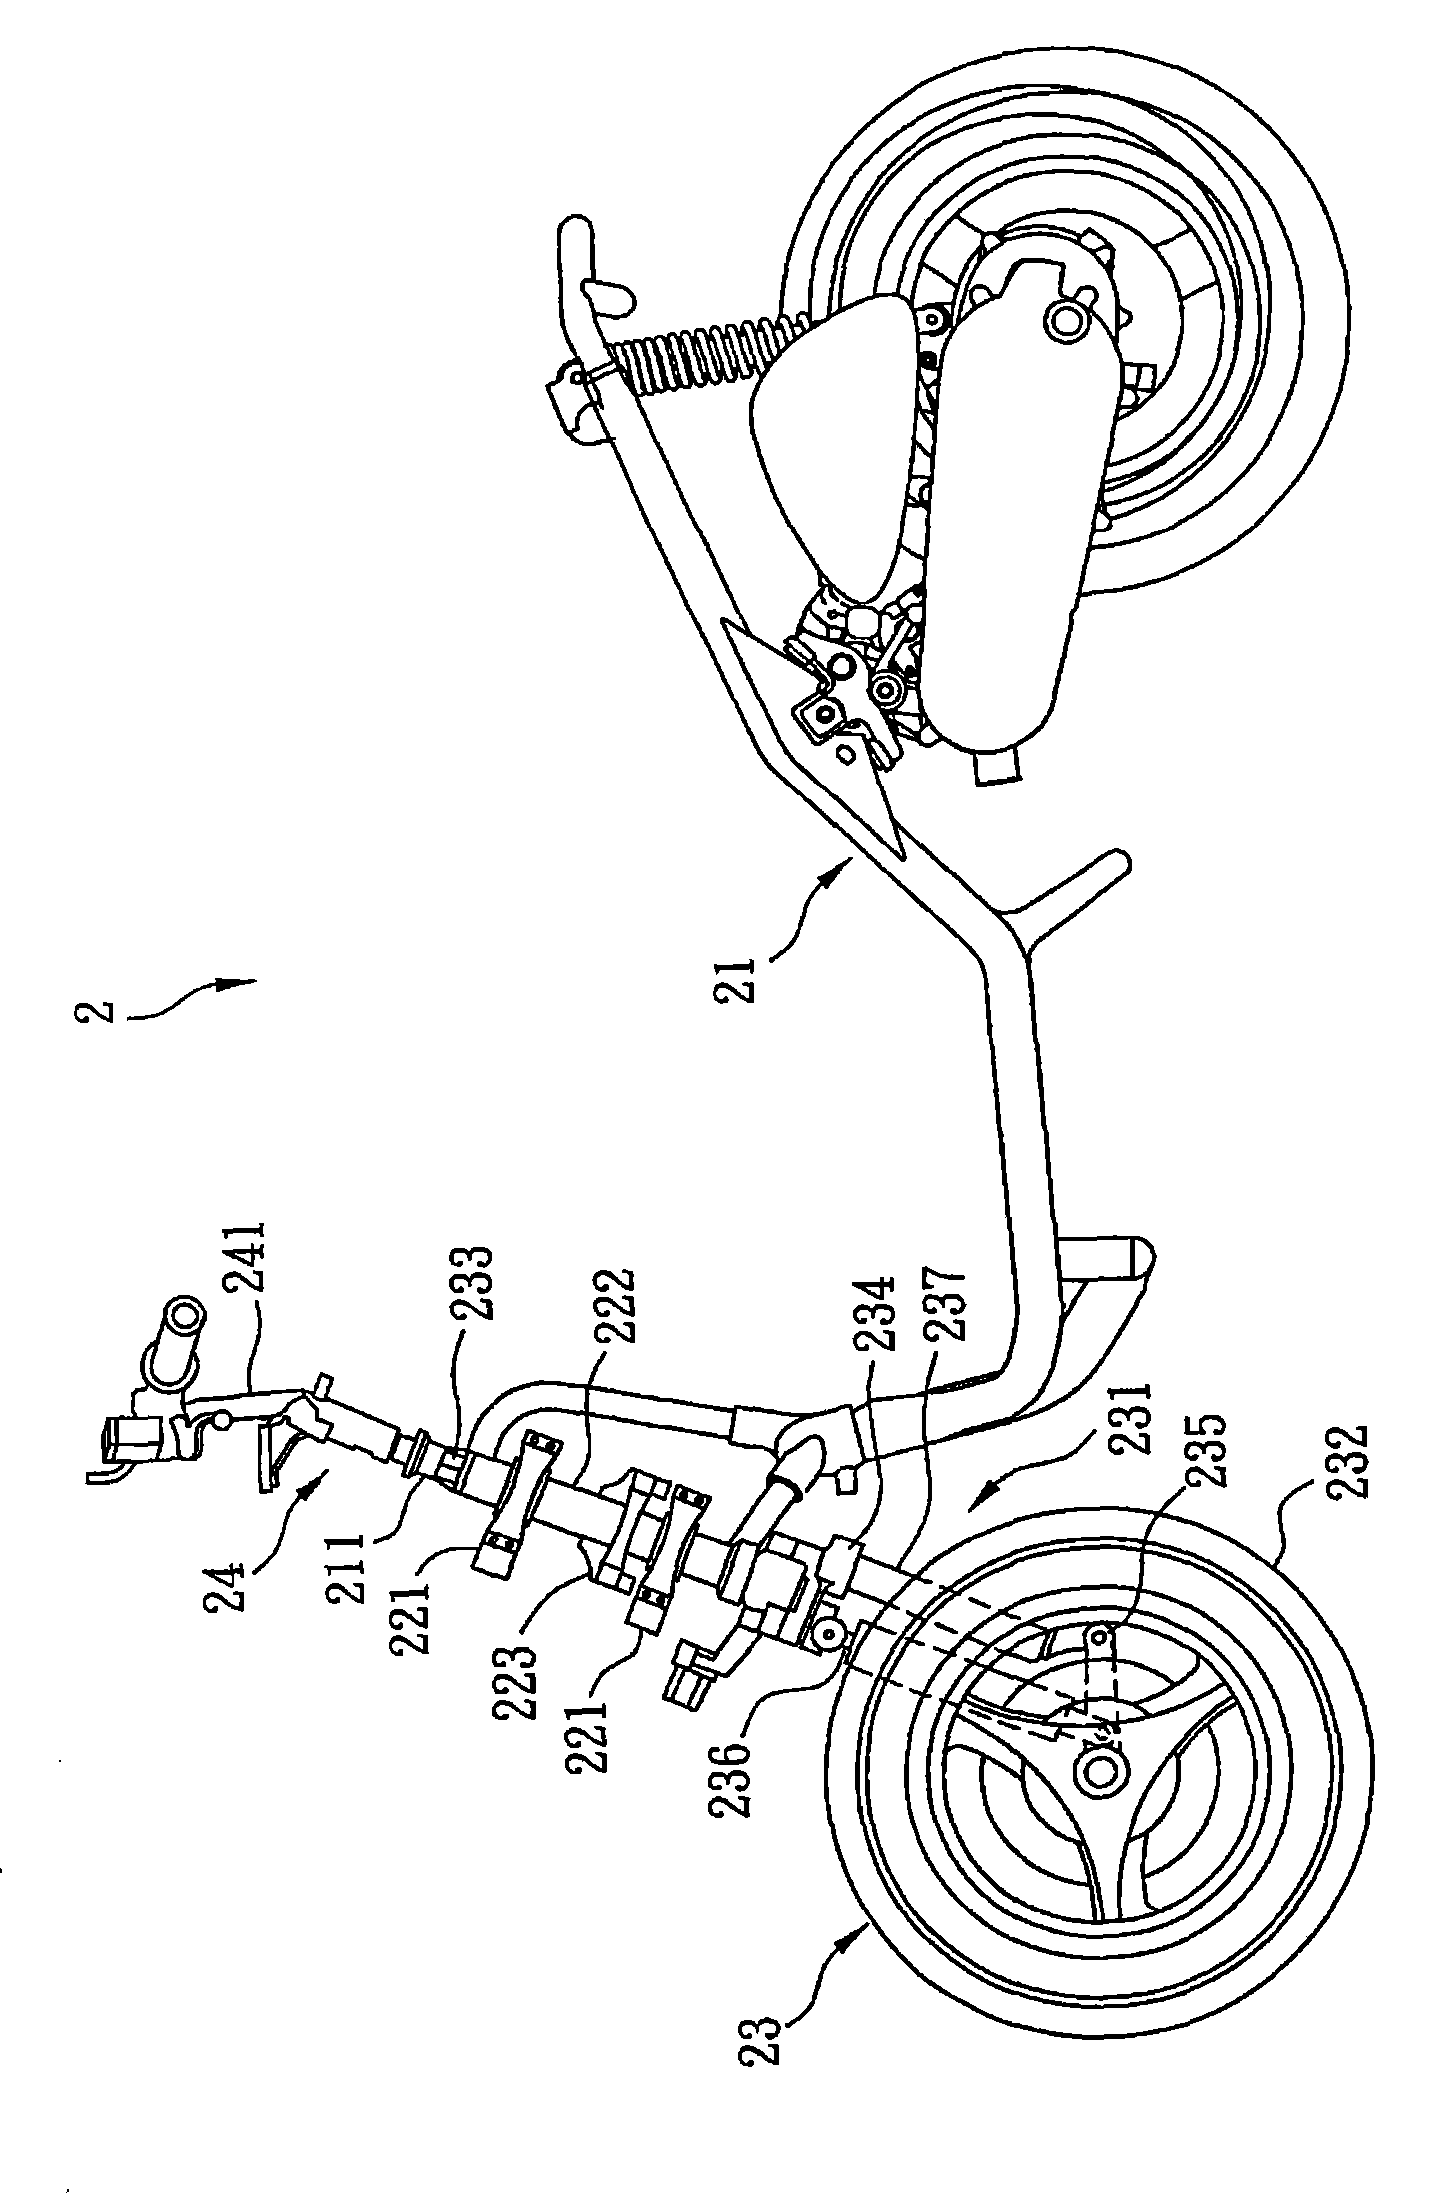 Overturn preventing device for vehicle with two front wheels